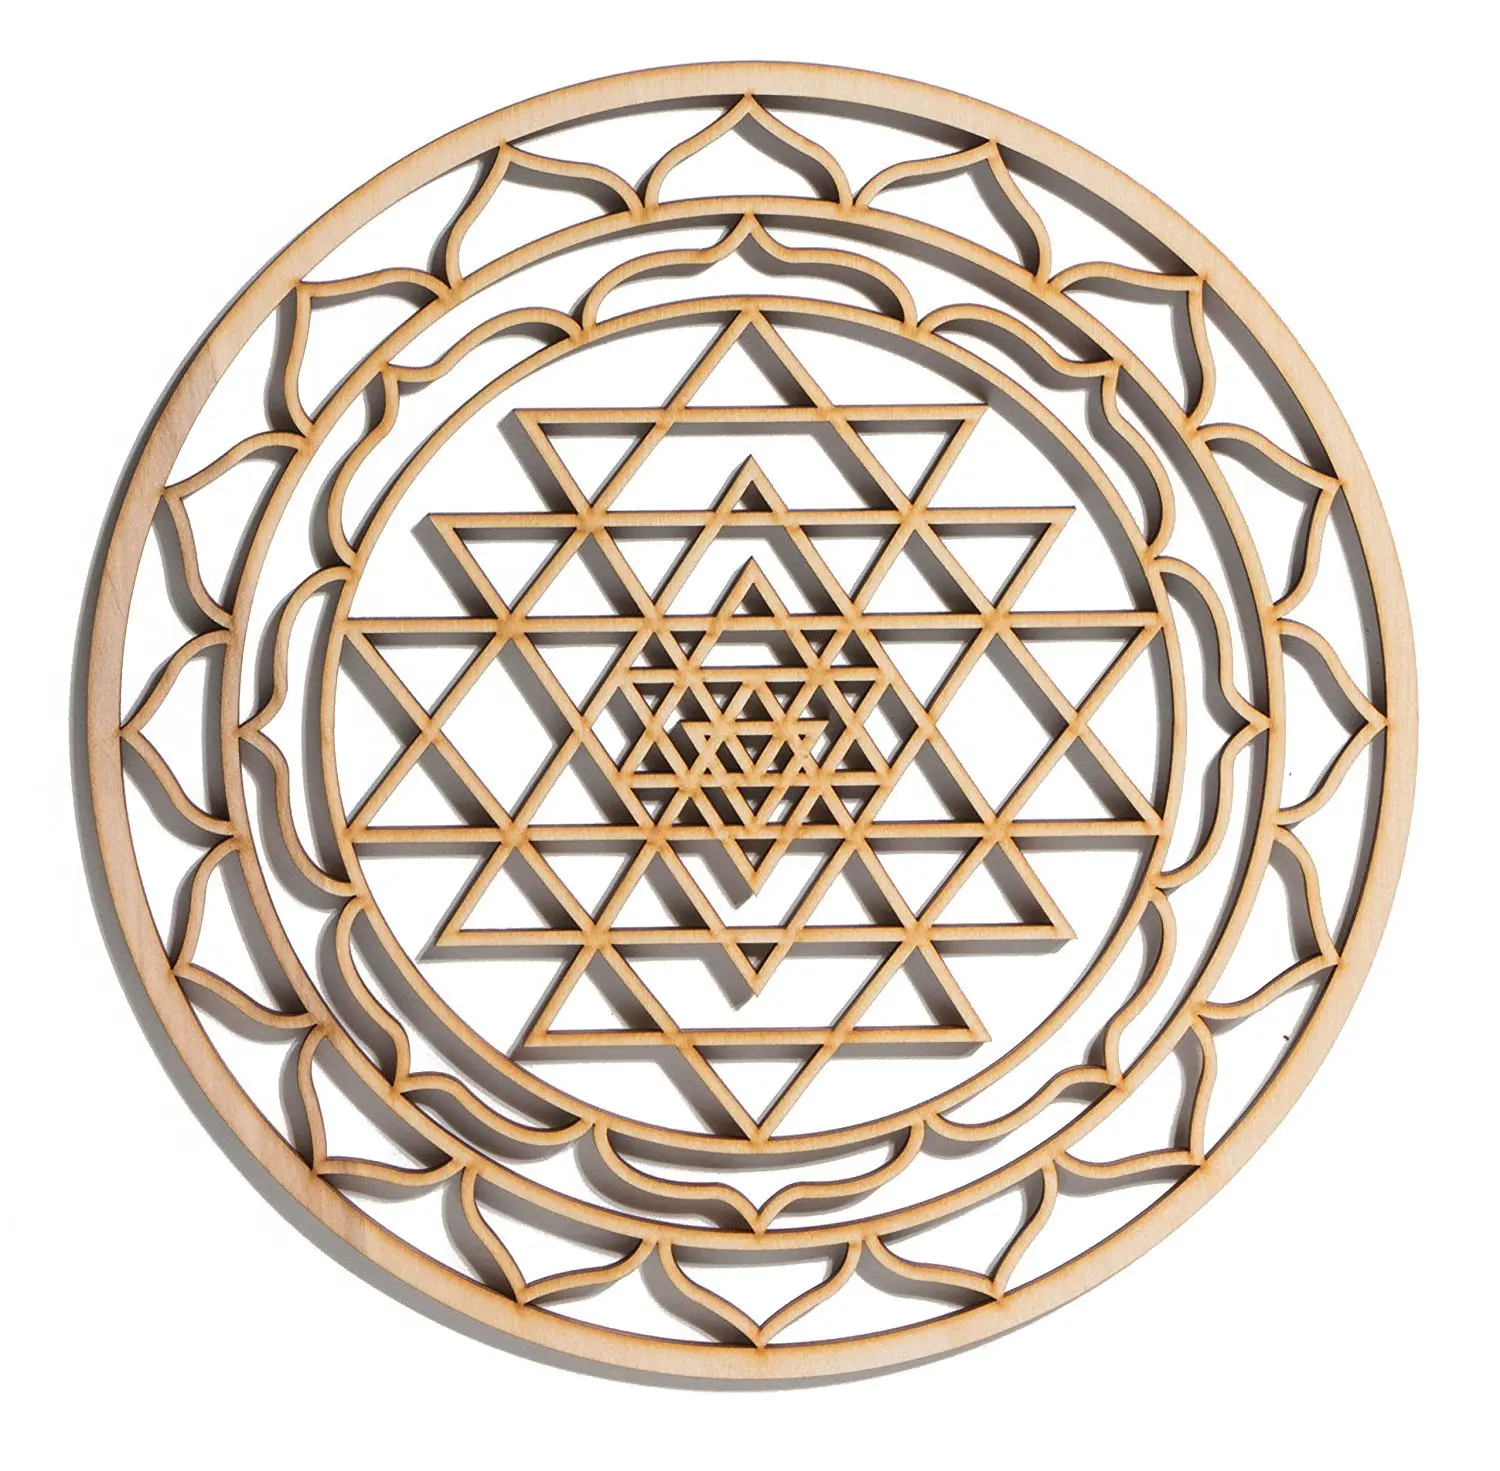 Buy 12 Sri Yantra Hindu Tantra Wooden Wall Art Hanging Home Decor Sacred Geometry Art Wood Sculpture Wall Decorations Usa Made Geometric In Cheap Price On Alibaba Com